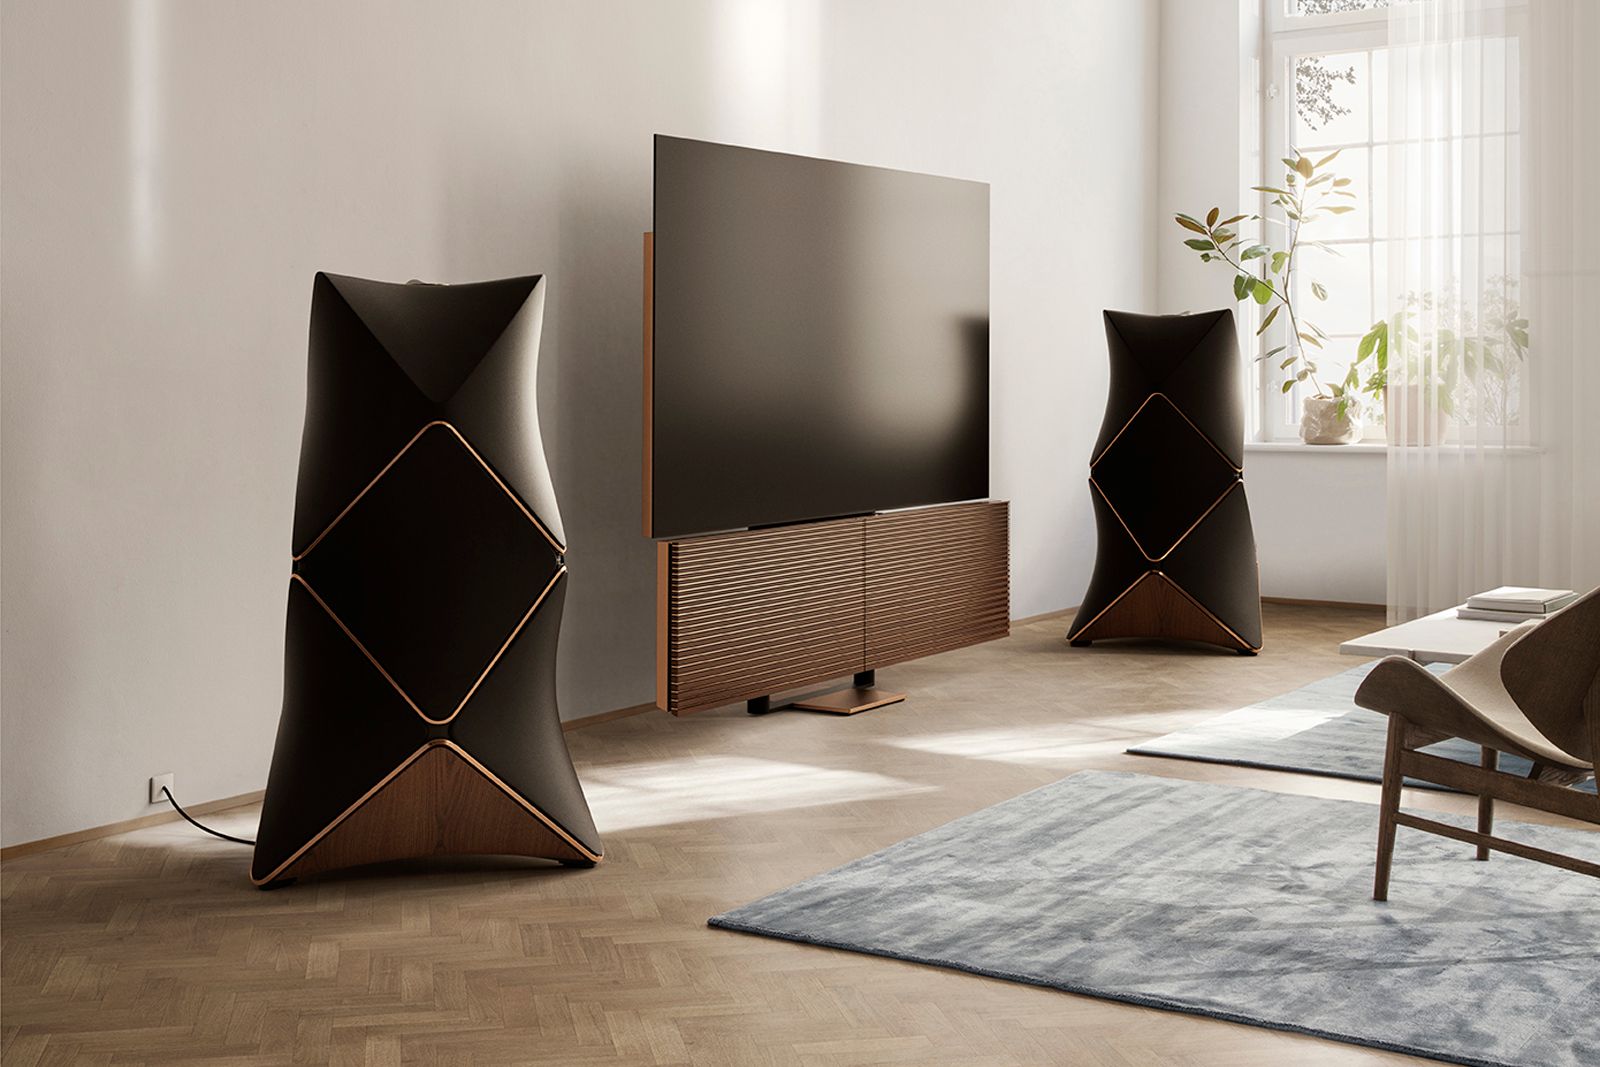 Bang  Olufsen debuts an 88-inch 8K TV version of its Beovision Harmony image 1